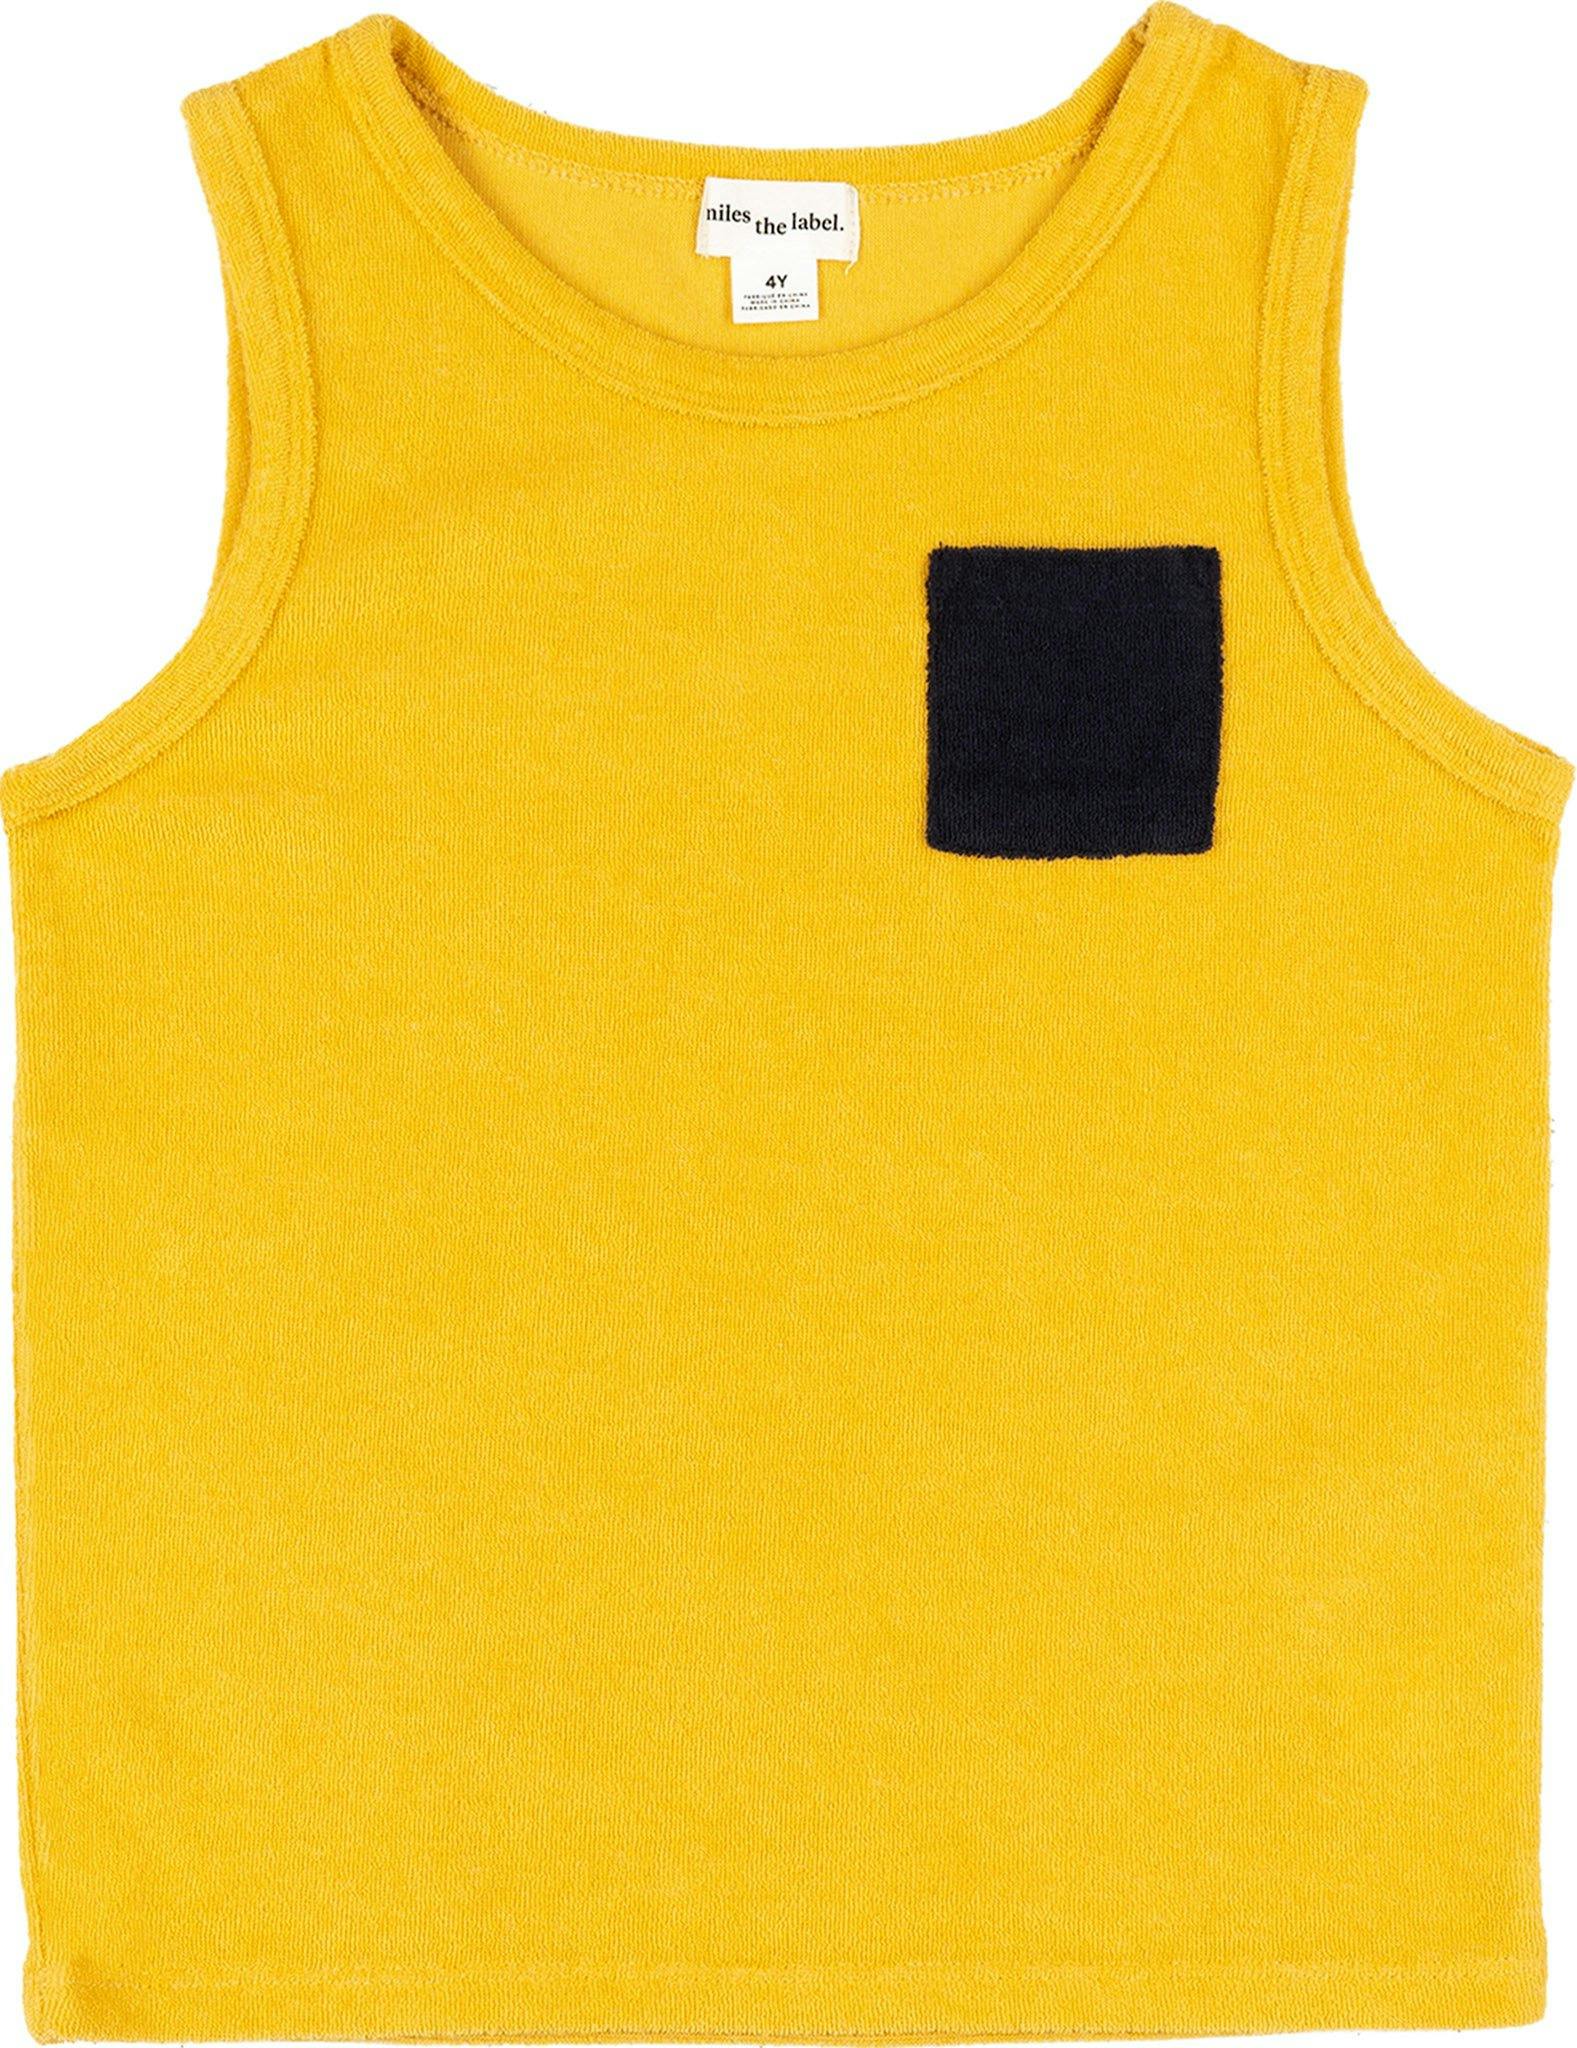 Product image for Sleeveless Knit Top - Boys